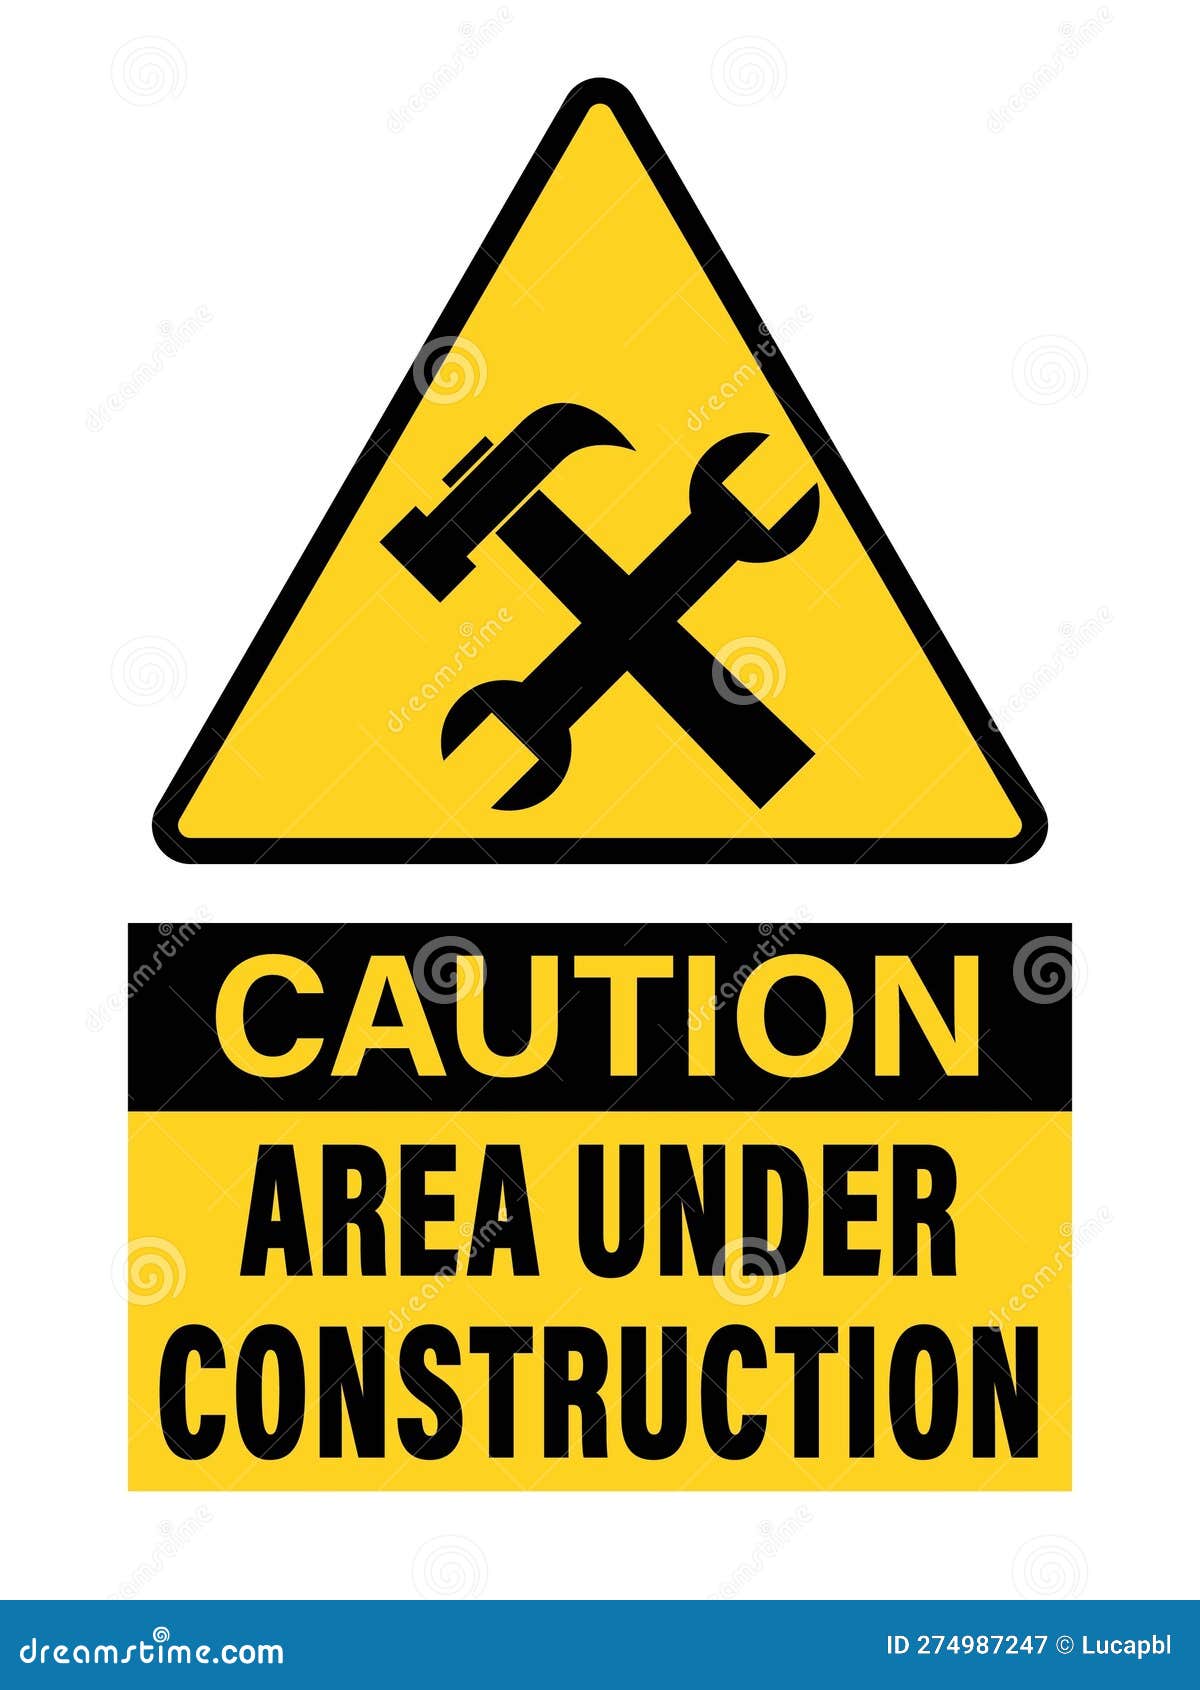 Caution, Area Under Construction. Warning Yellow Triangle Sign with ...